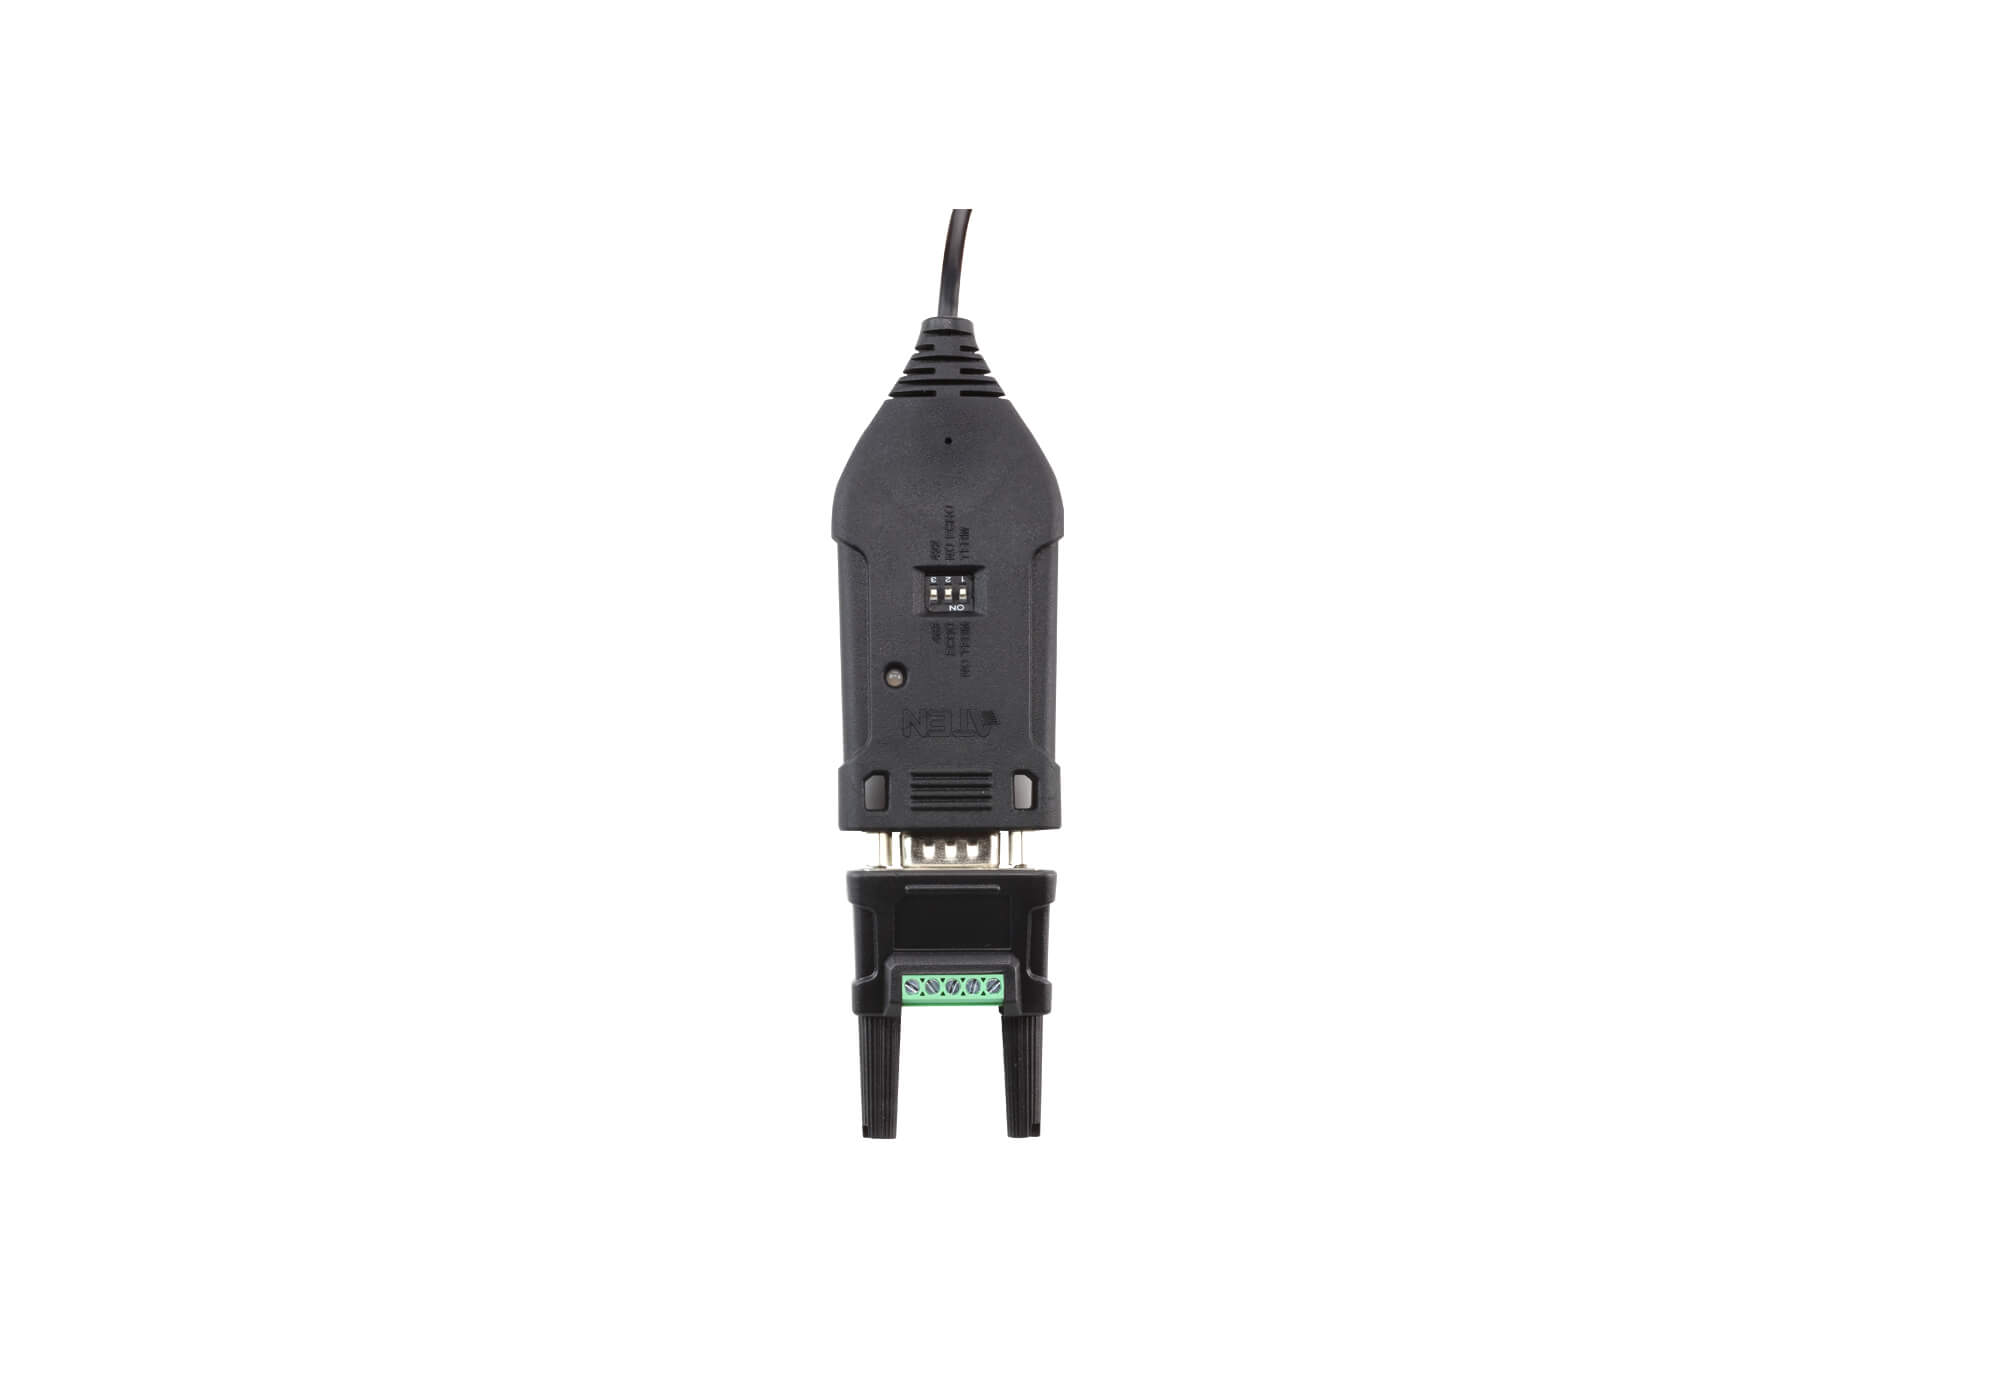 Aten USB to RS-422/485 Adapter